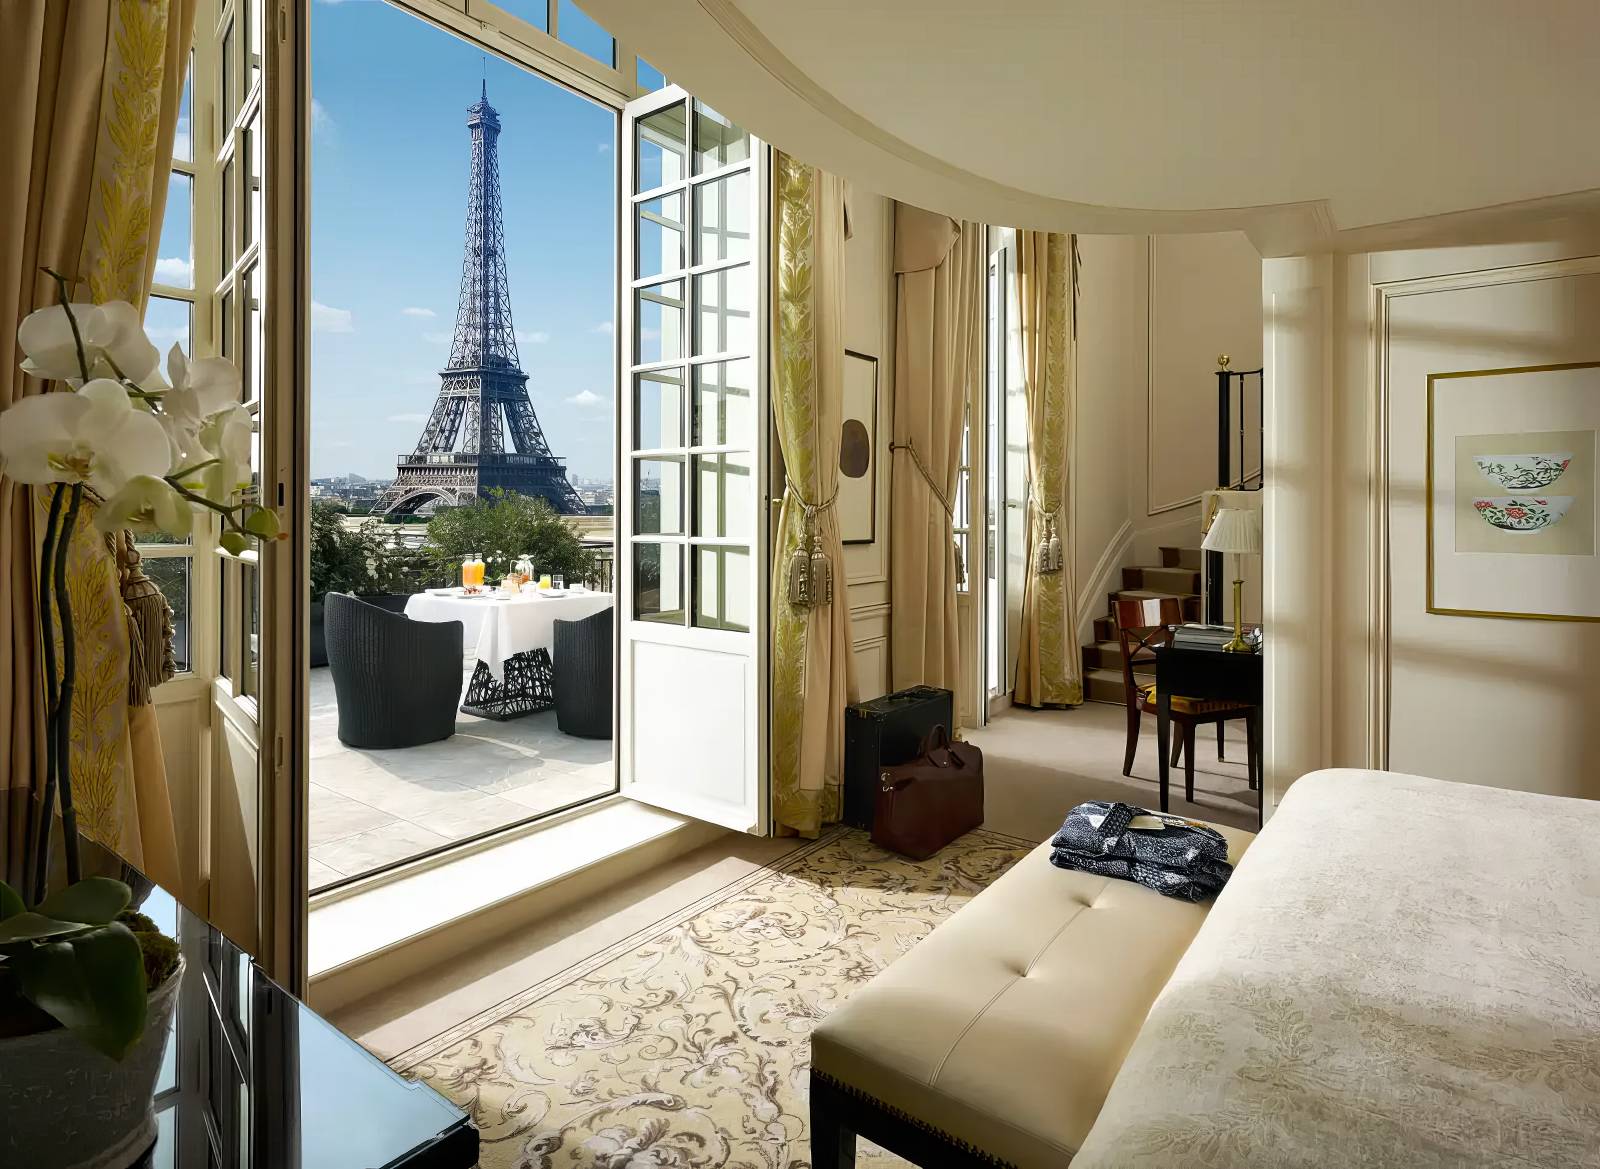 Is Paris expensive for accommodations